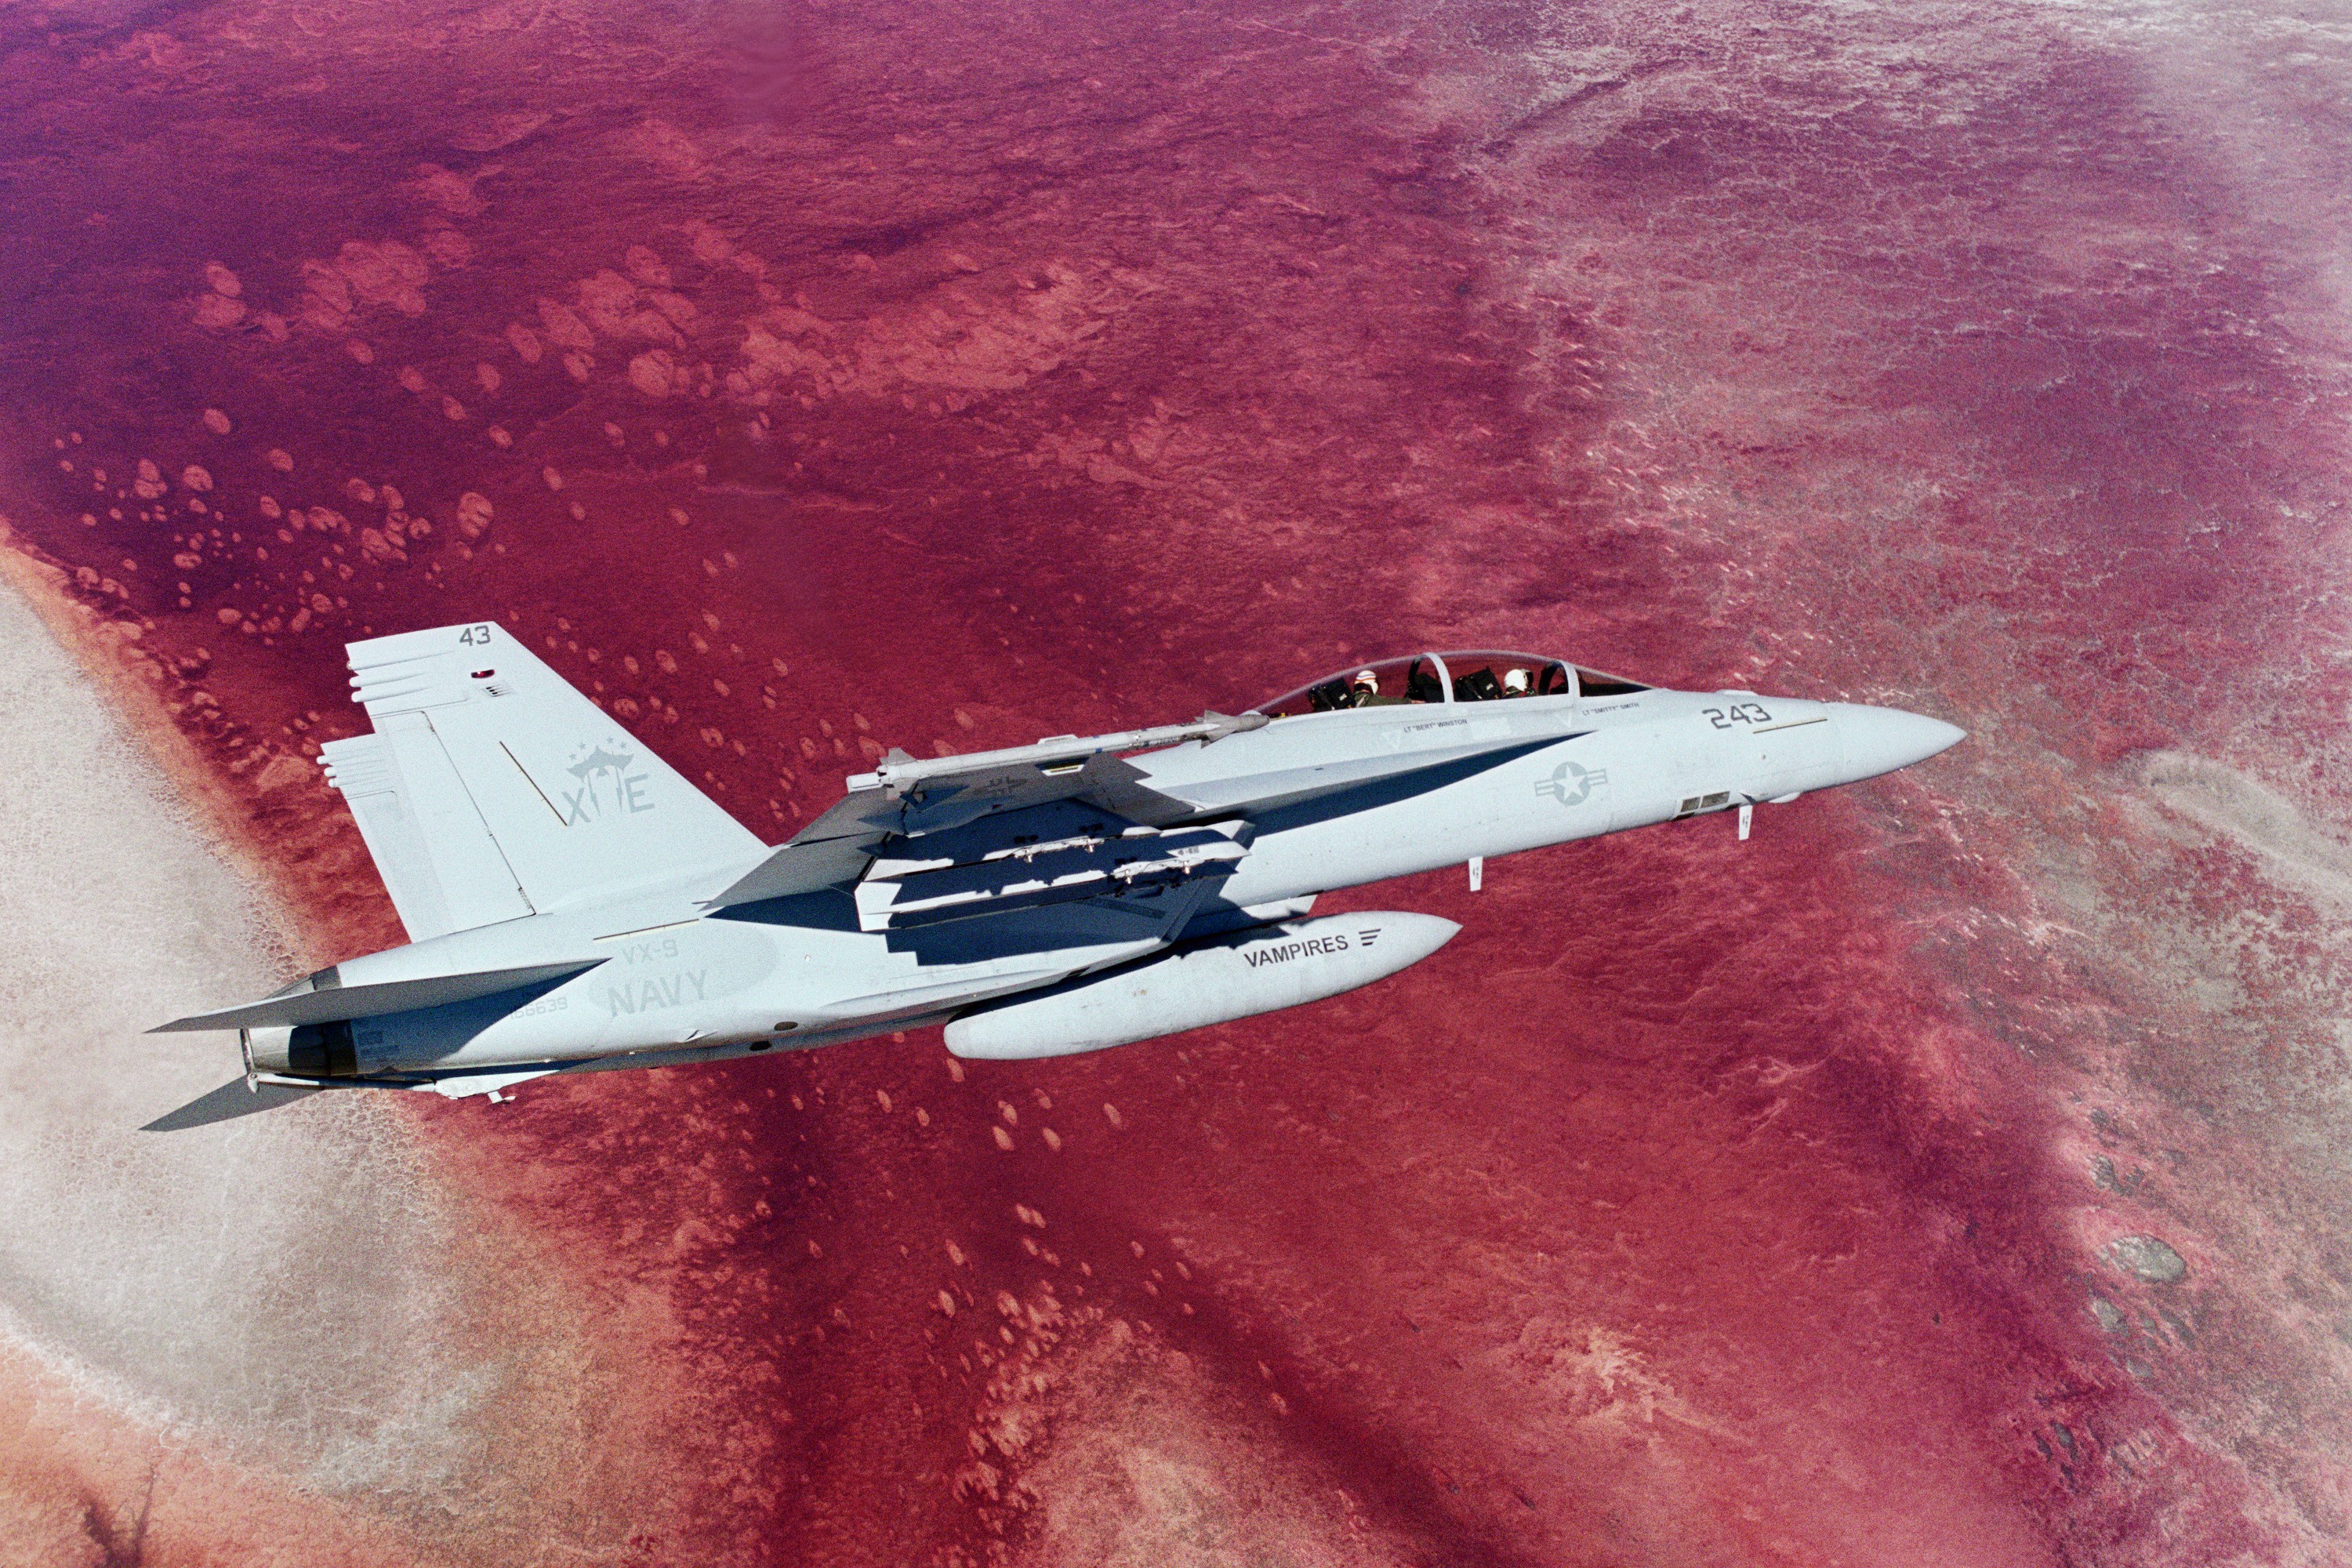 US_Navy_051215-N-9277A-001_An_F-A-18F_Super_Hornet_assigned_to_Air_Test_and_Evaluation_Squadron_Nine_(VX-9)_conducts_an_operation_test_mission,_while_over_the_Owens_Lake_in_the_vast_Eastern_High_Sierra_and_Mojave_test_ranges.jpg